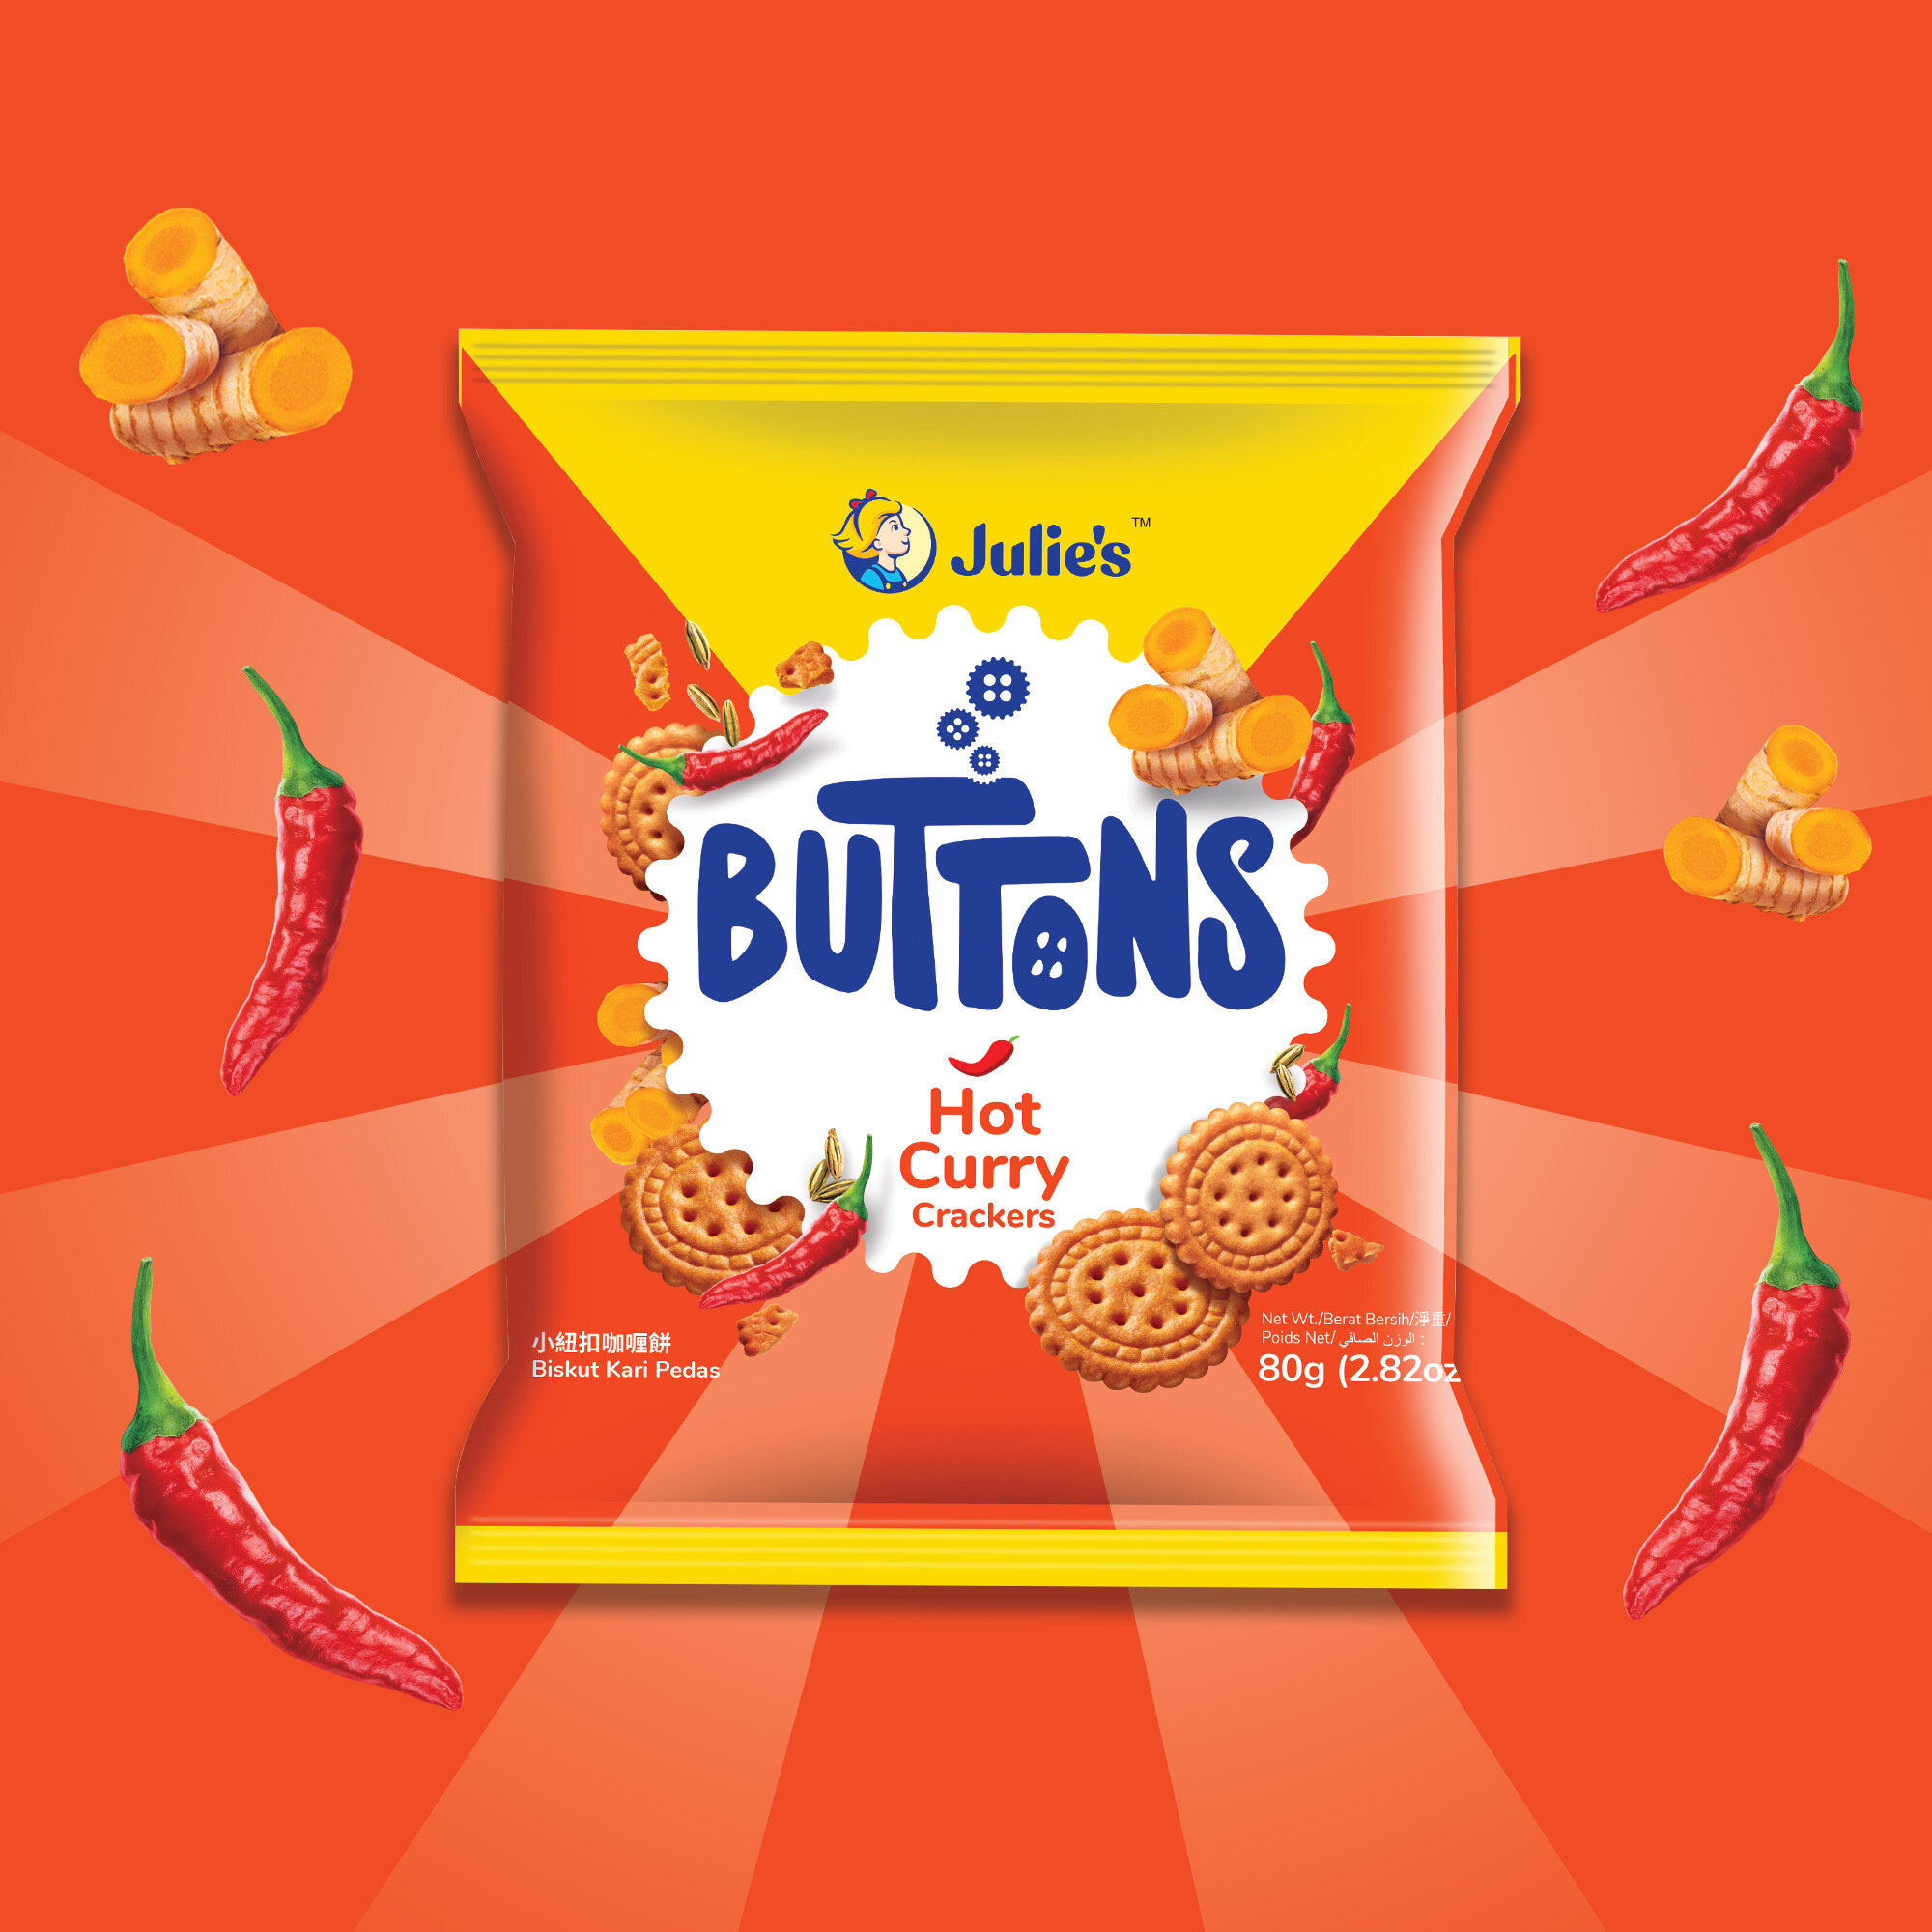 Julie's Buttons Hot Curry Crackers 80g x 1 pack